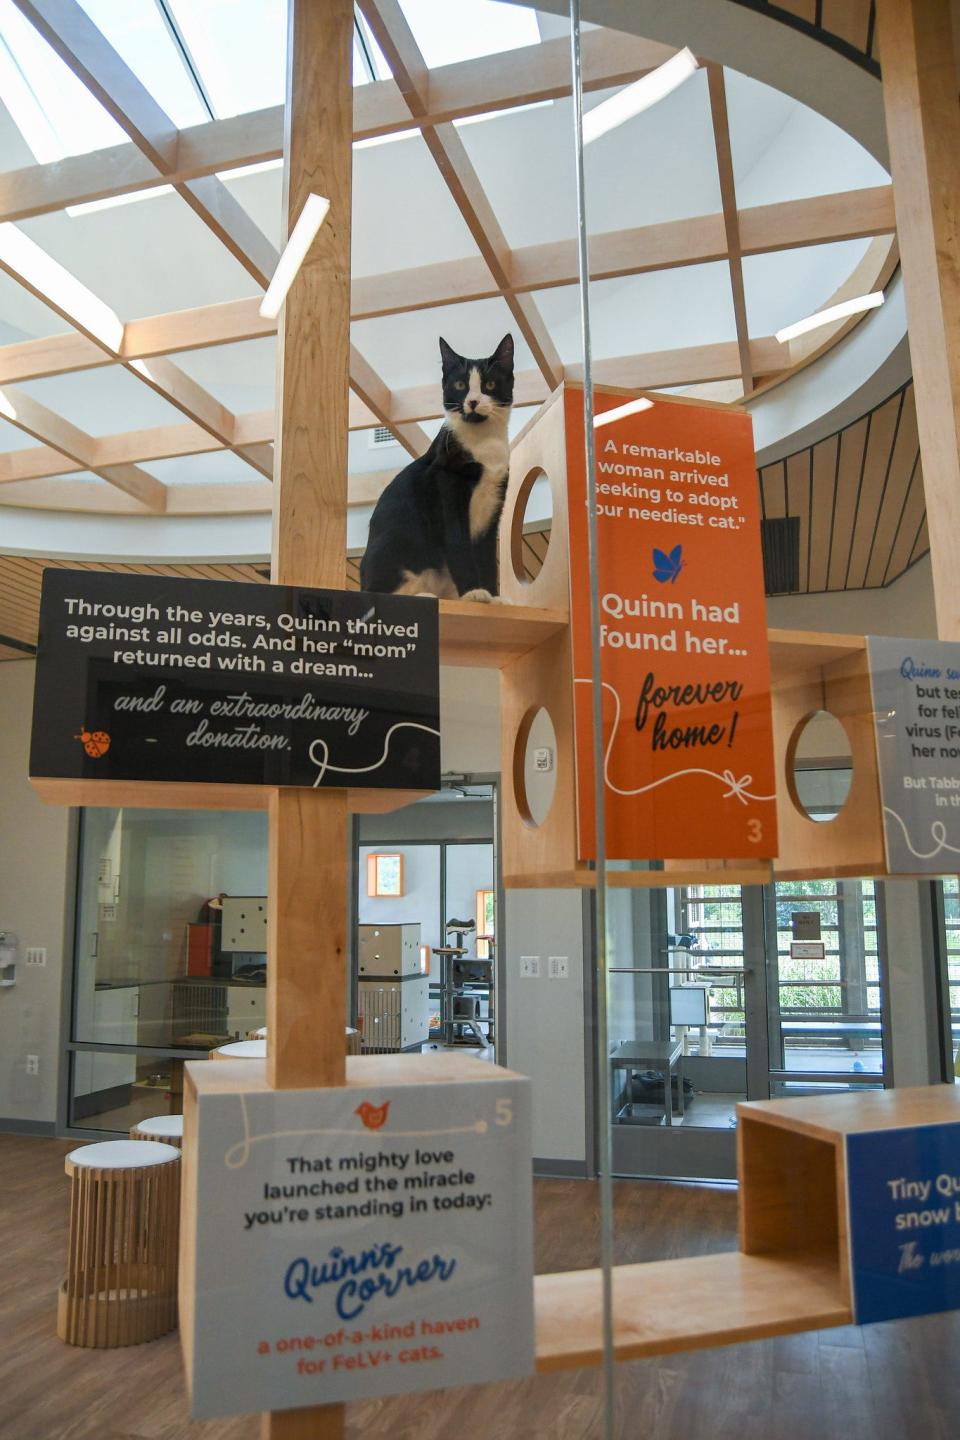 Quinn’s Corner features a bright and open area where friendly FeLV+ cats will snuggle with visitors and volunteers, enjoying the same social life as "normal" cats.